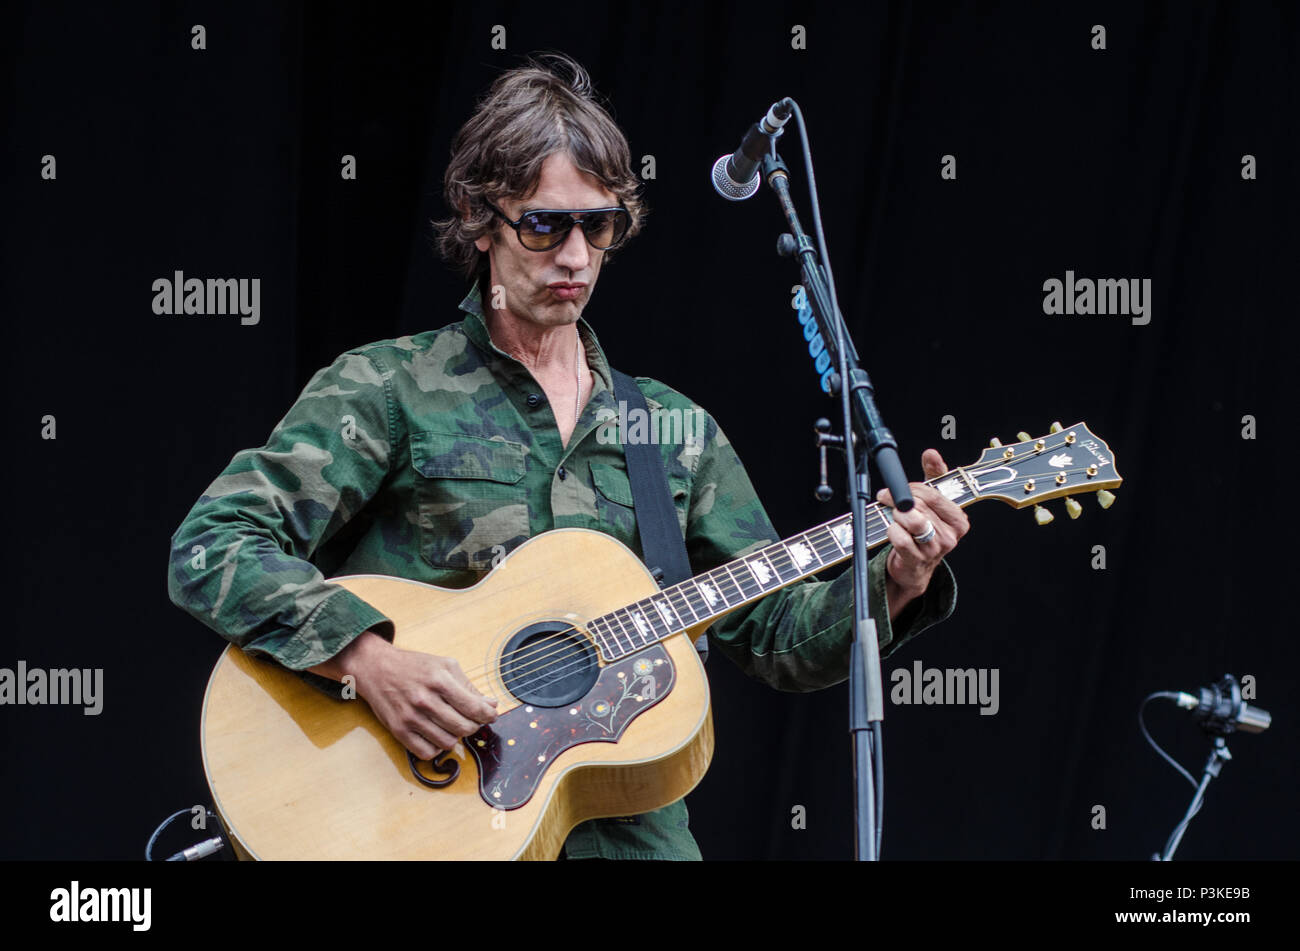 Richard Ashcroft The Verve Performing Live Stock Photo